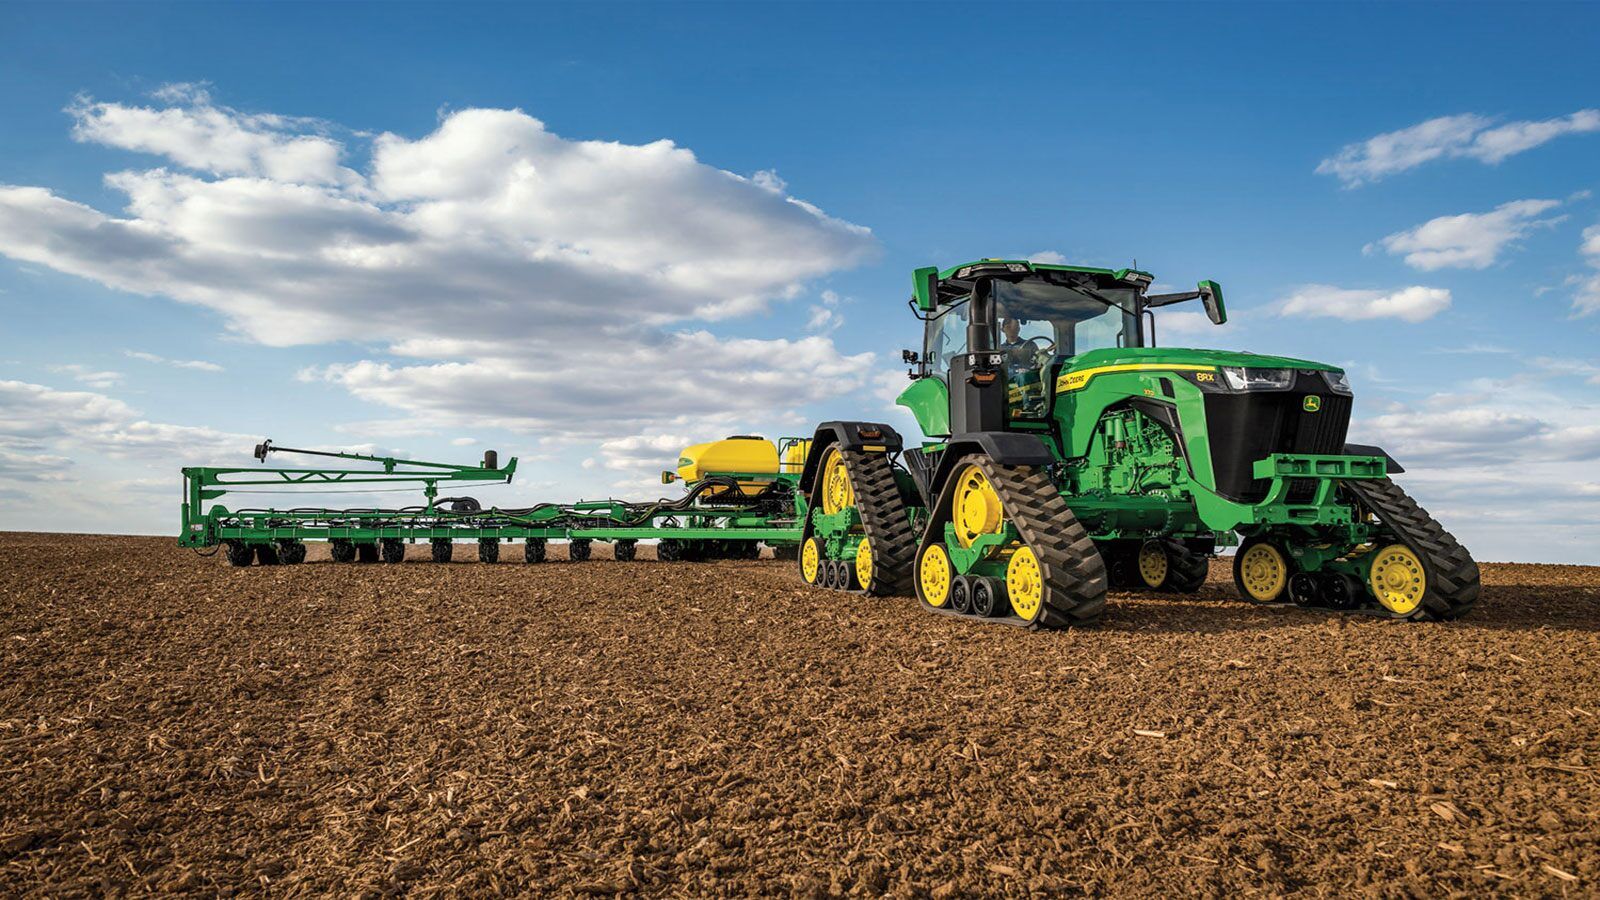 John Deere introduces the 8RX Tractor. The HeavyQuip Magazine